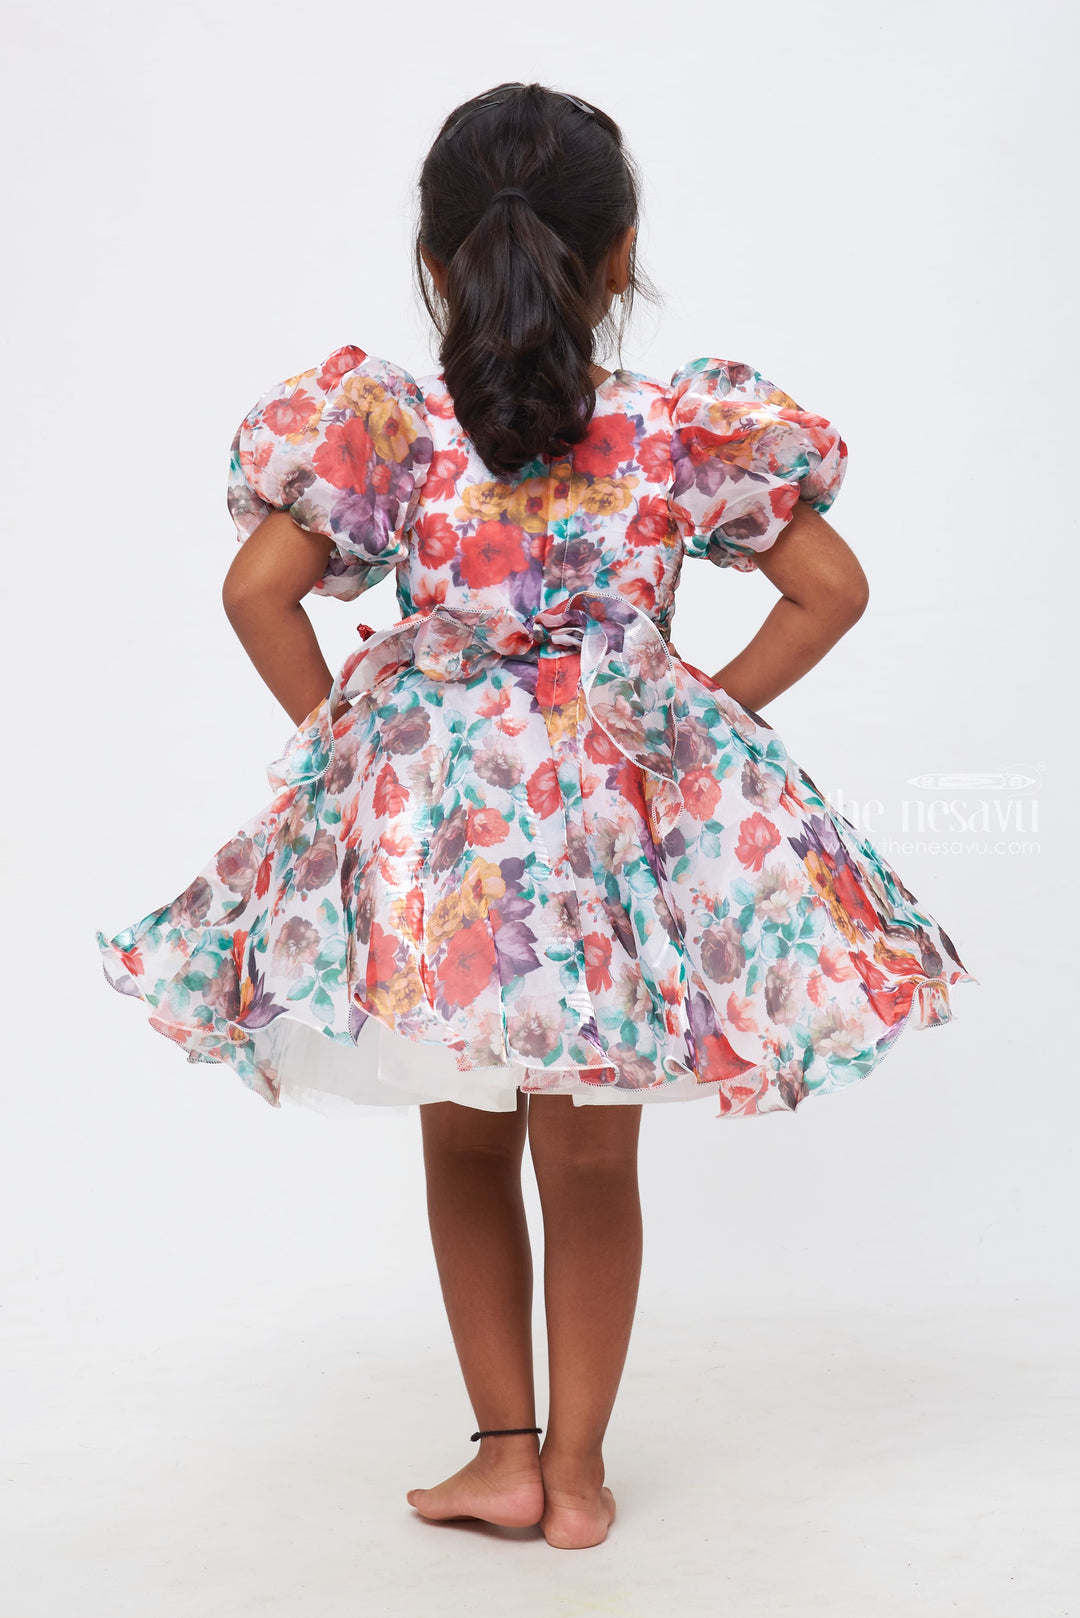 The Nesavu Girls Fancy Party Frock Blooming Beauty: Girls Floral Dress with Sparkling Red Bow Accent Nesavu Dazzling Designs for Young Fashionistas | Party Frocks Collection | The Nesavu